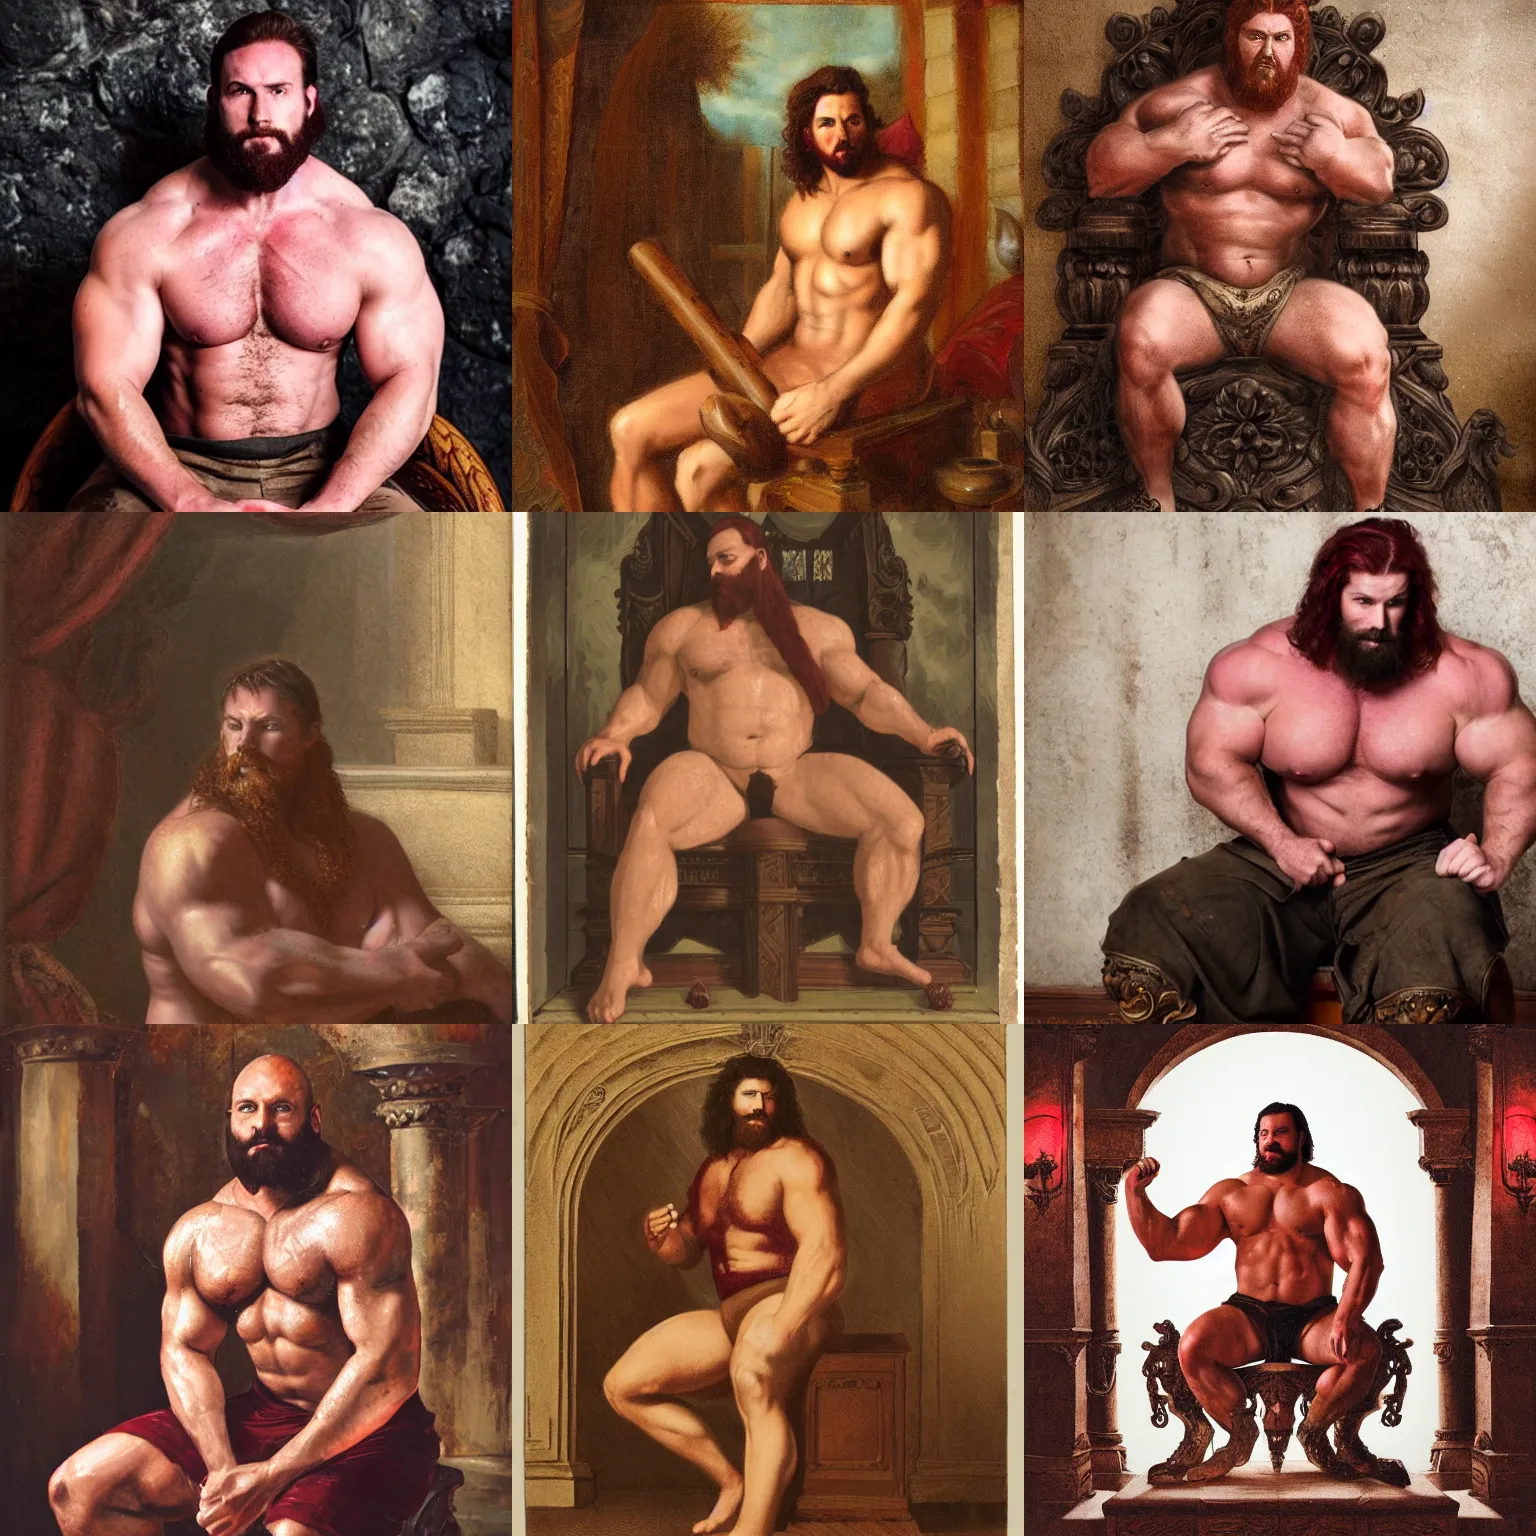 Prompt: burly muscular man with dark red hair sitting in a dimly lit room on an ornate wood and stone throne